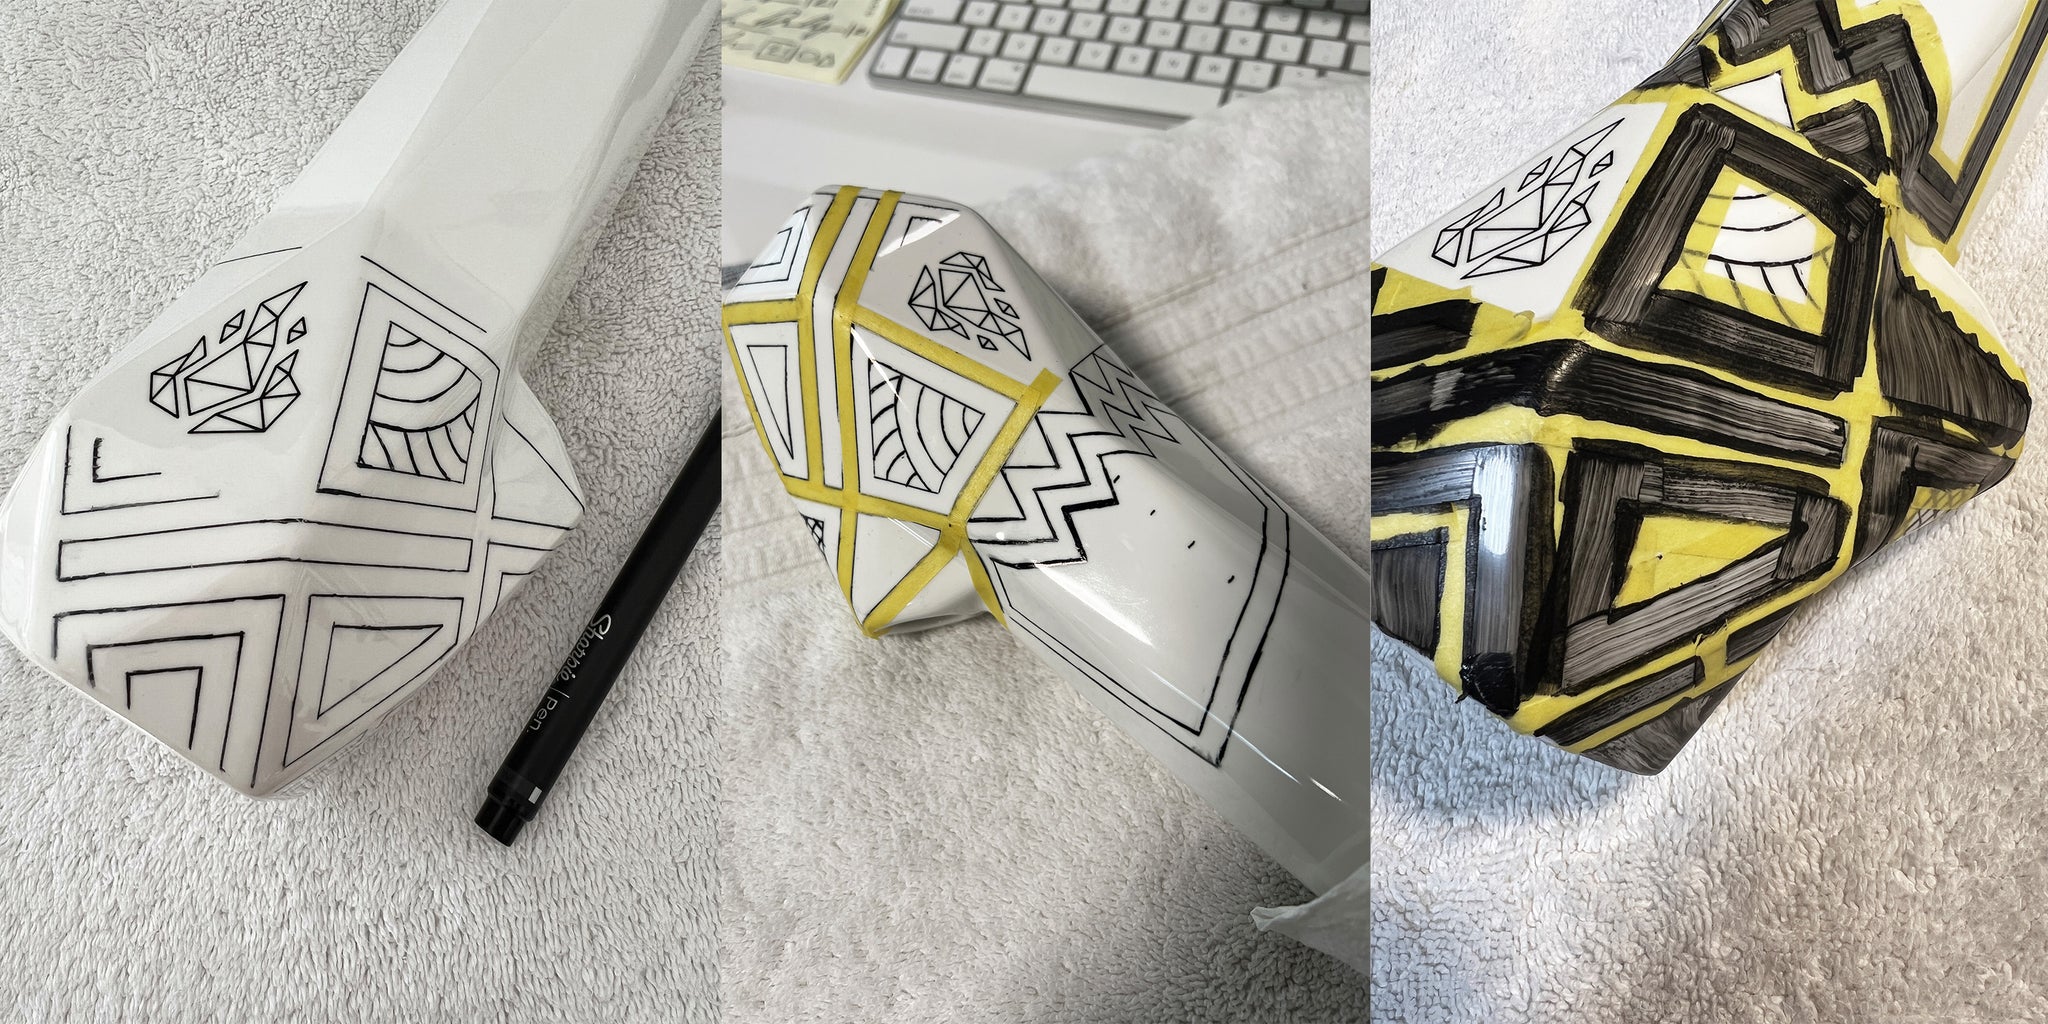 Process photos of painting BRNT Designs ceramic bong. Left Image: White aesthetic bong with drawn on lines to guide the artist's painting, Middle Image: Ceramic geometric bong with tape applied to lines to guide artist Devin Agar when painting the ceramic bong. Right Image: Paint applied to ceramic geometric hexagon bong.  